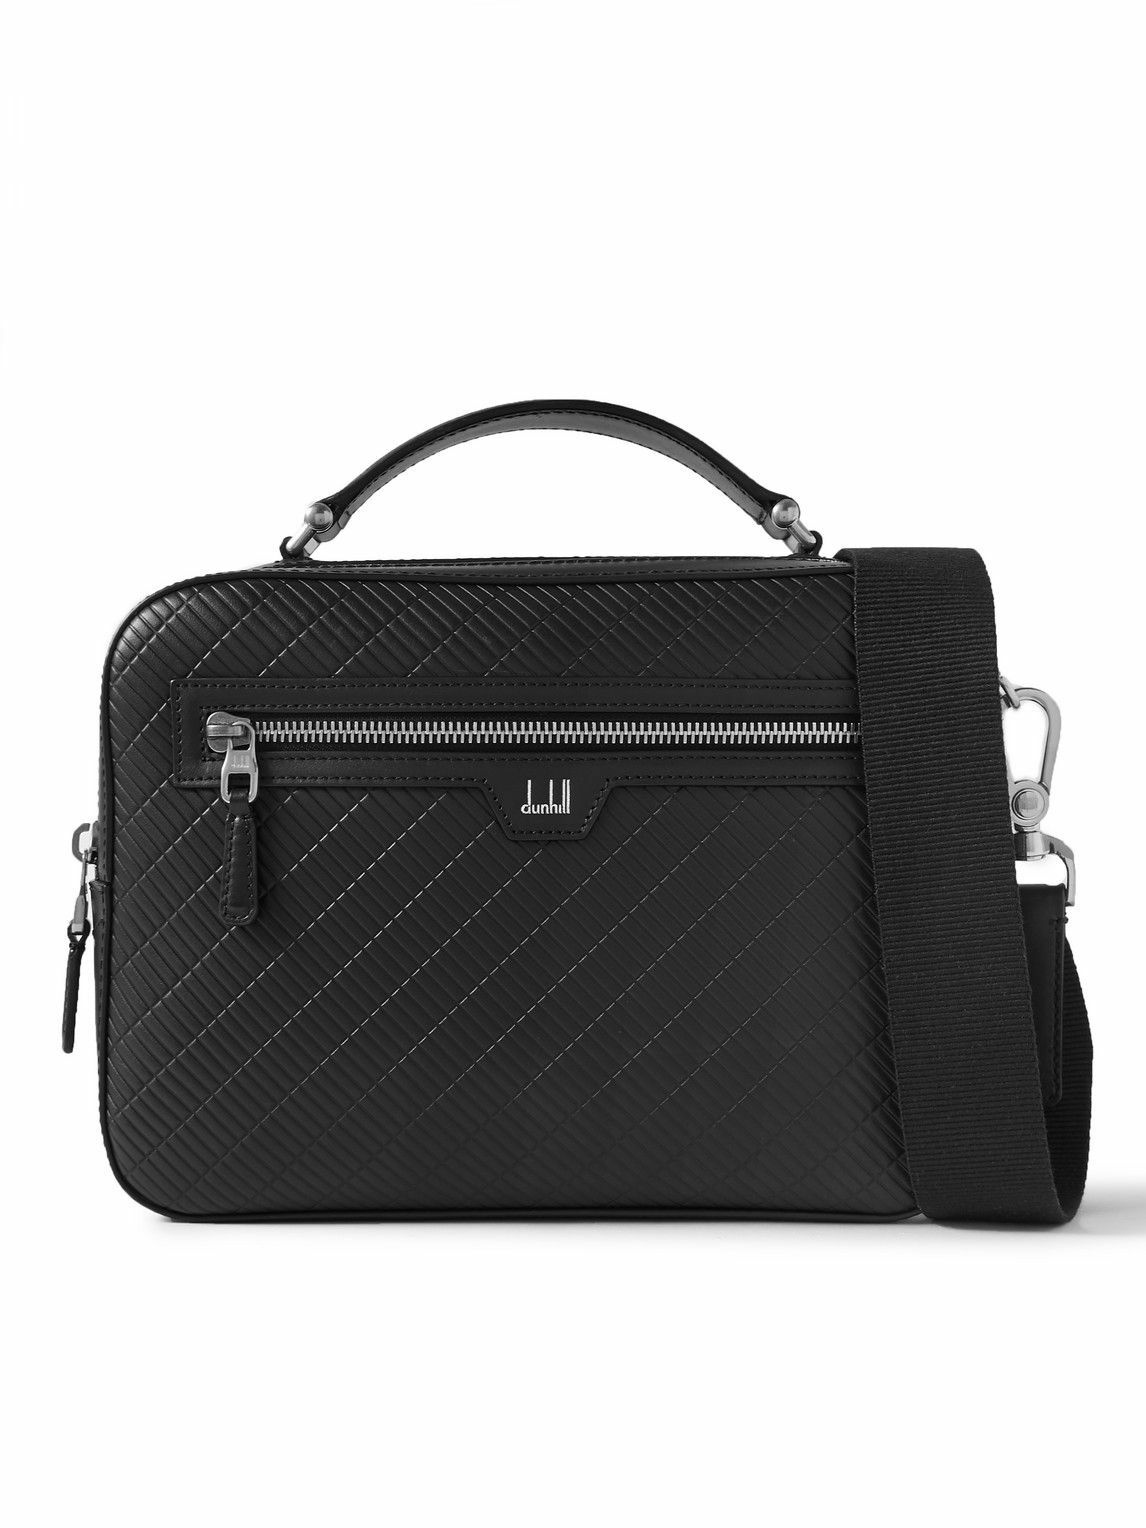 Photo: Dunhill - Contour Quilted Leather Messenger Bag